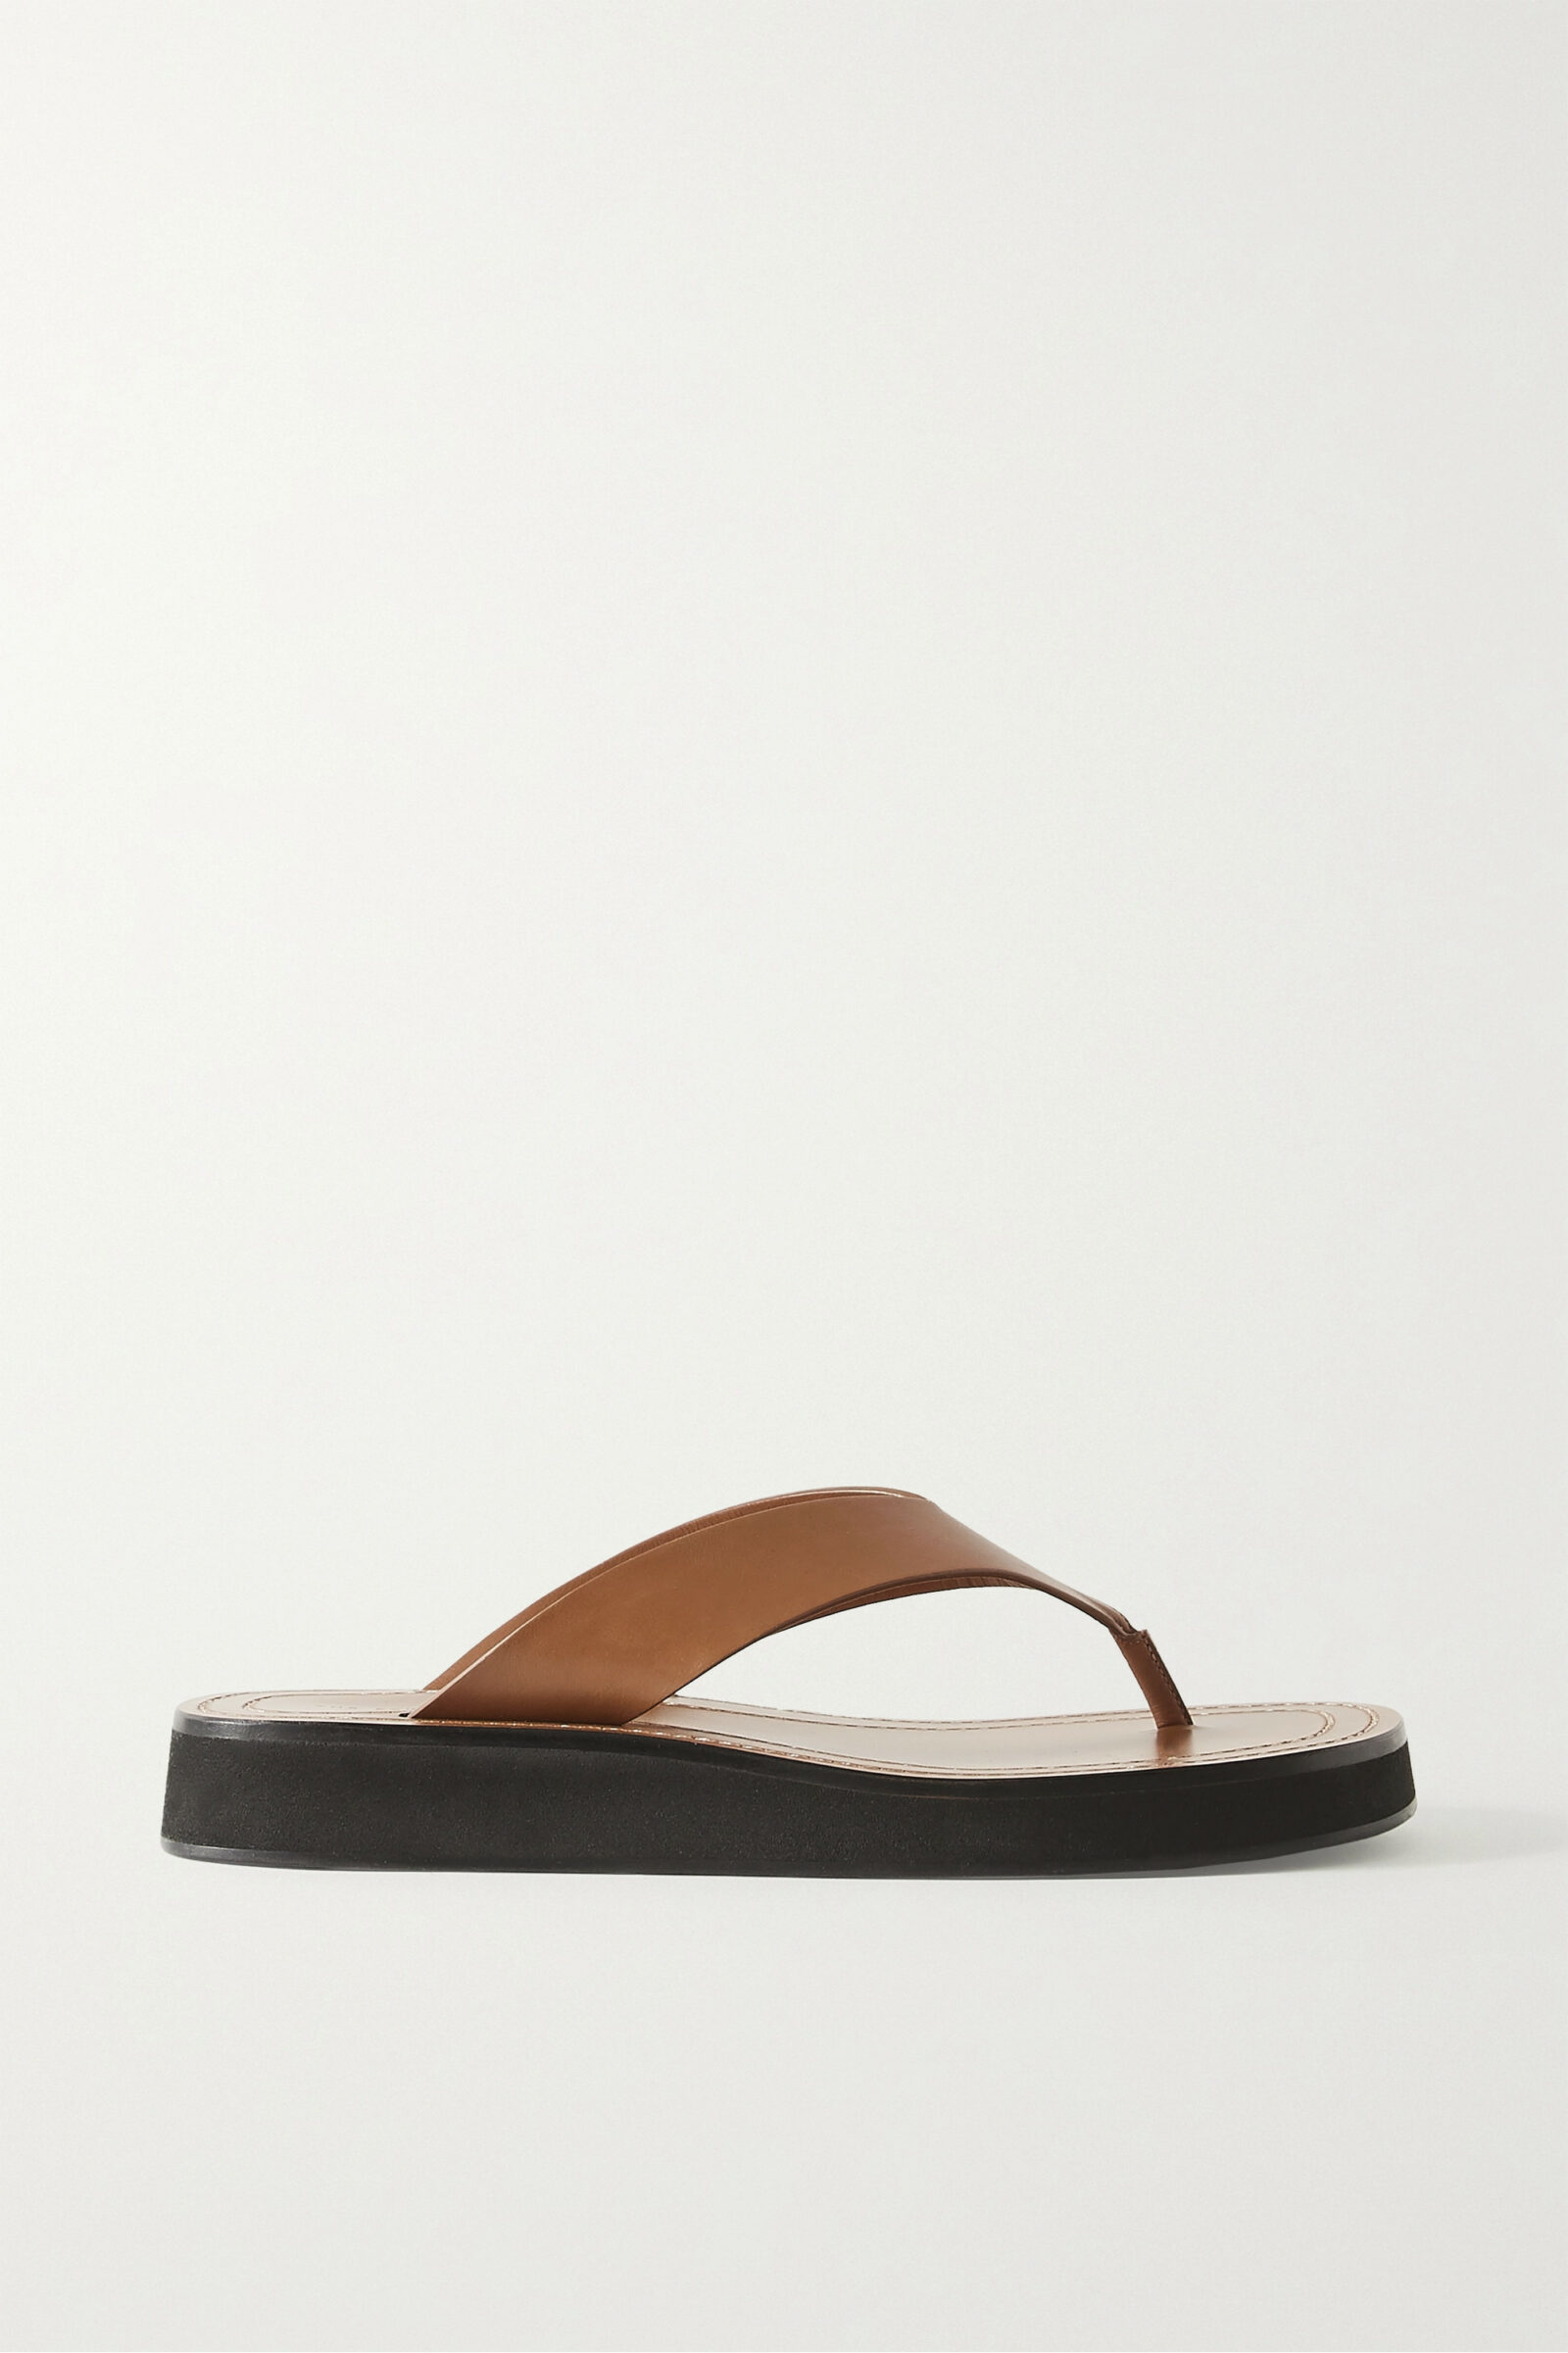 15 Summer Sandals To Add To Your Footwear Collection Right Away